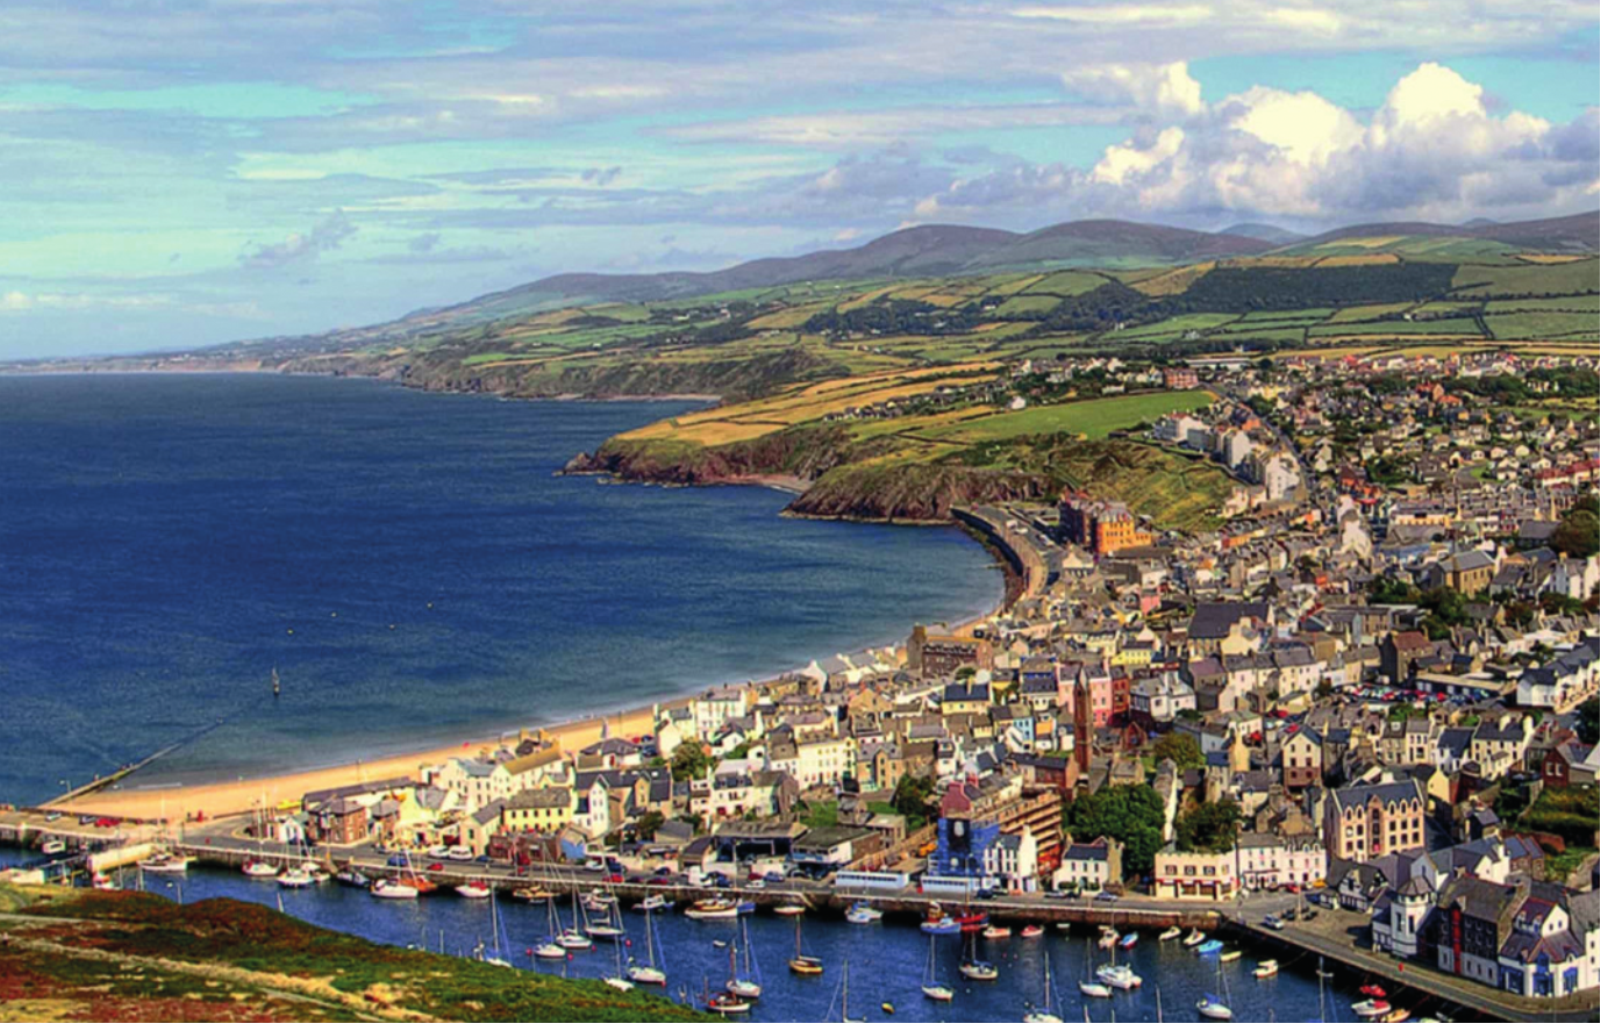 Isle of Man 27 June - 1 Jul Tours by Celtic Travel Holidays Wales